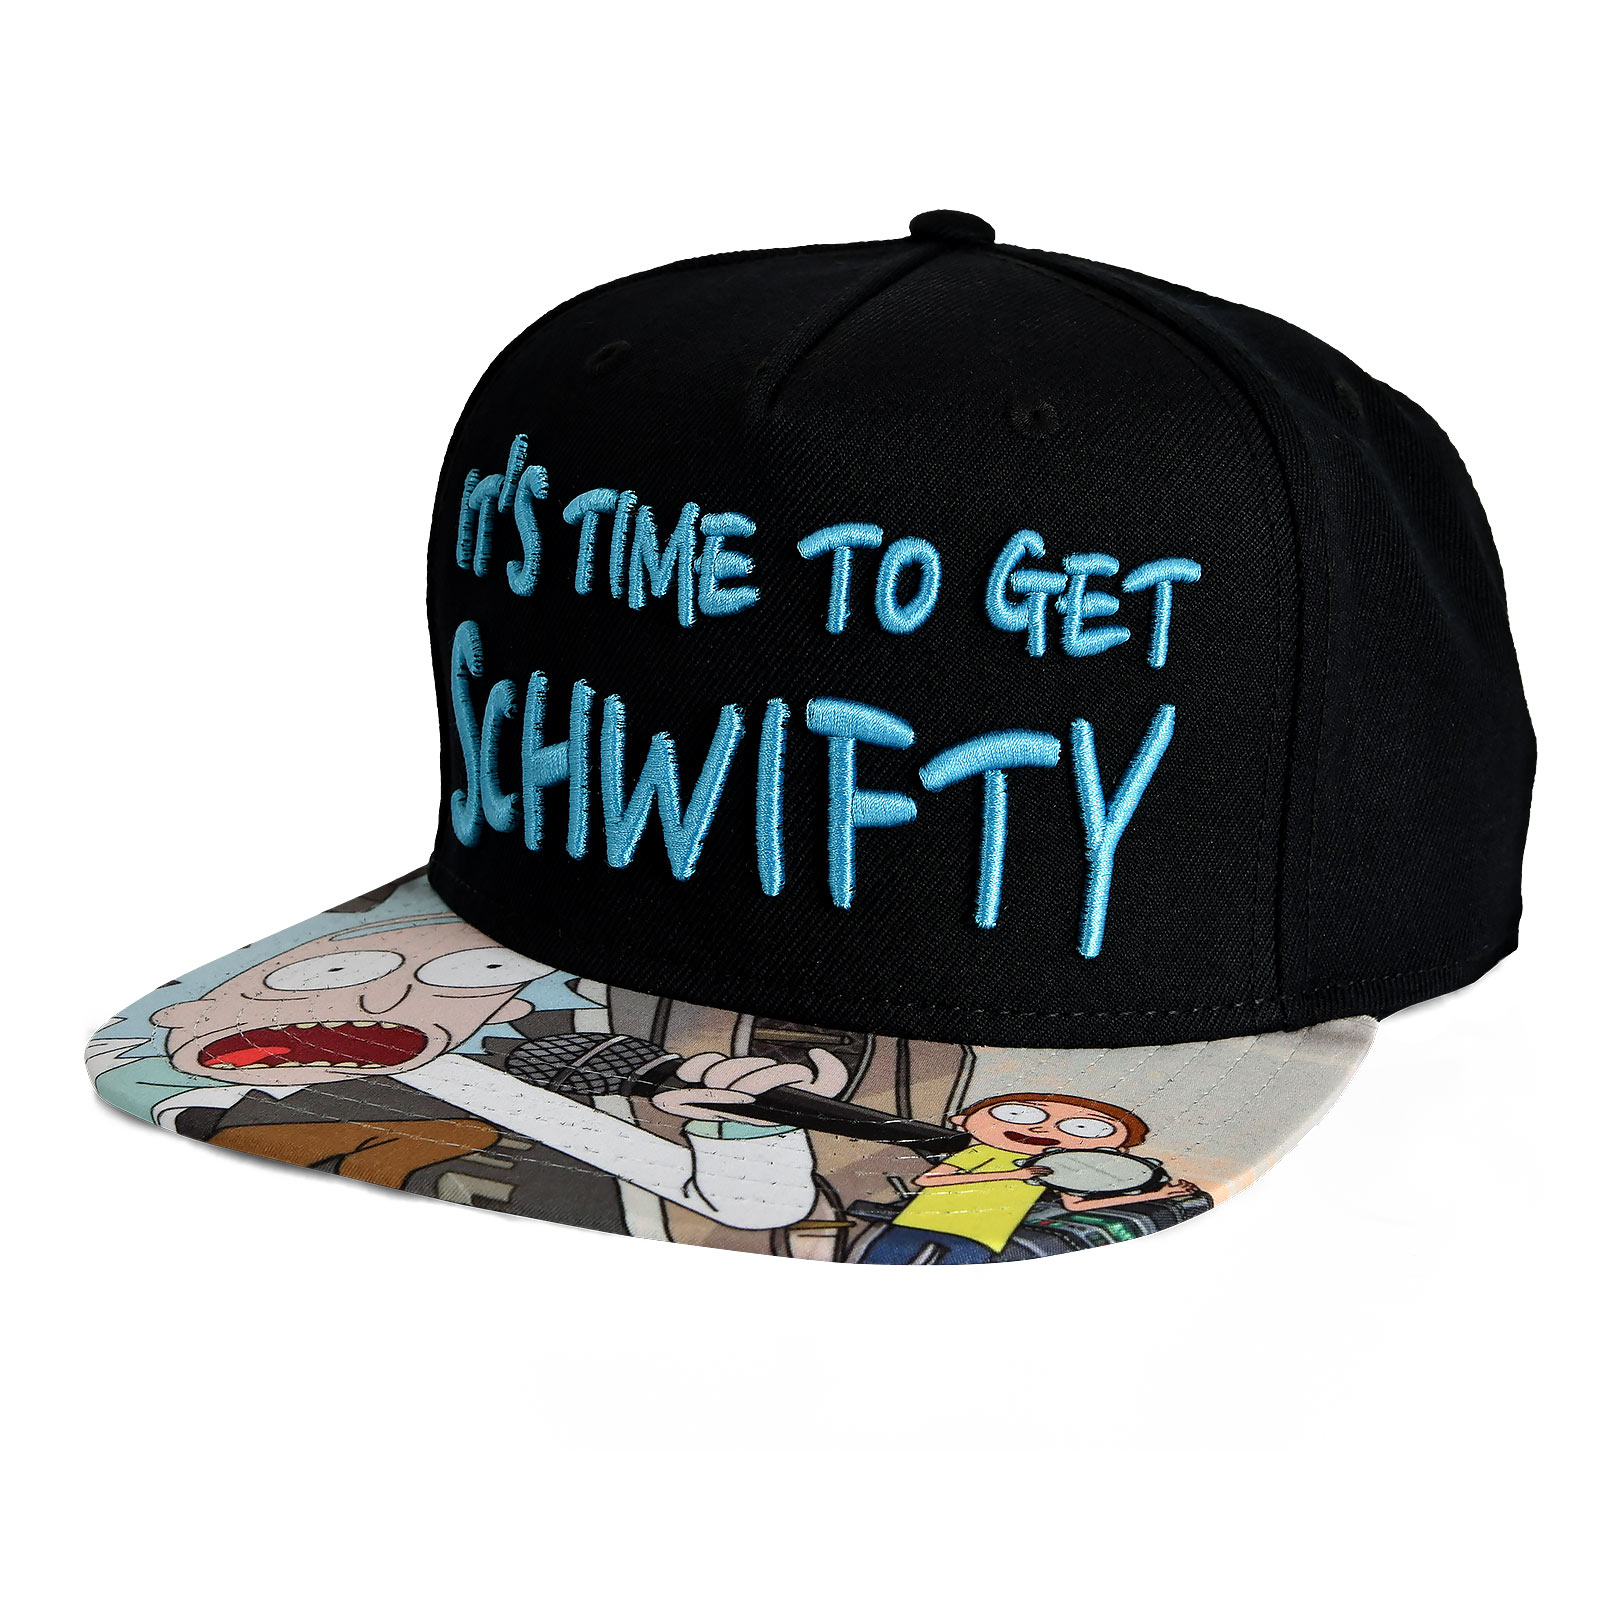 Rick and Morty - Get Schwifty Snapback Cap